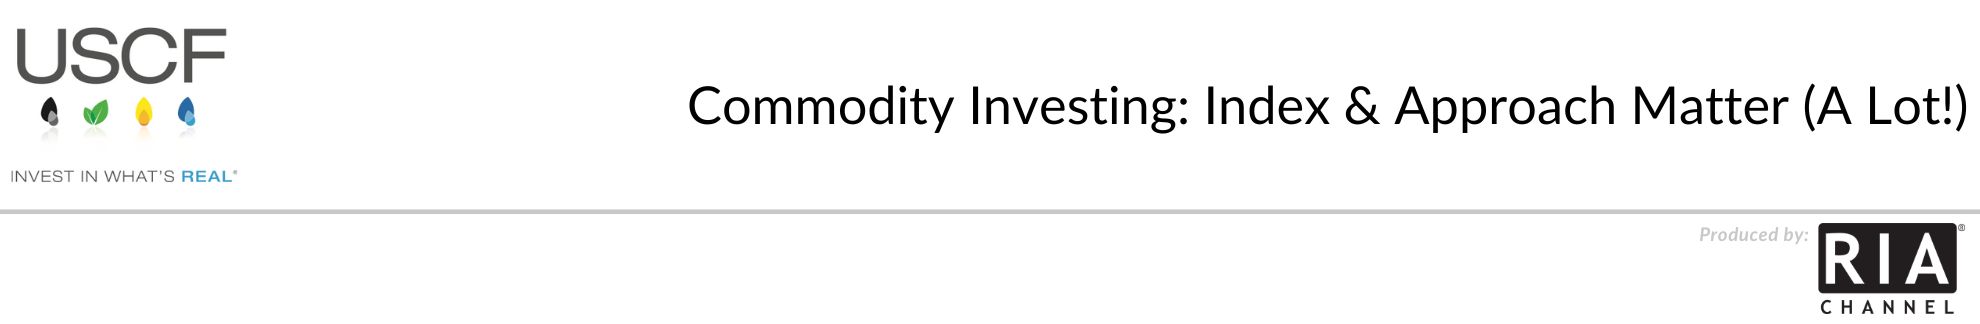 Commodity Investing: Index & Approach Matter (A Lot!)